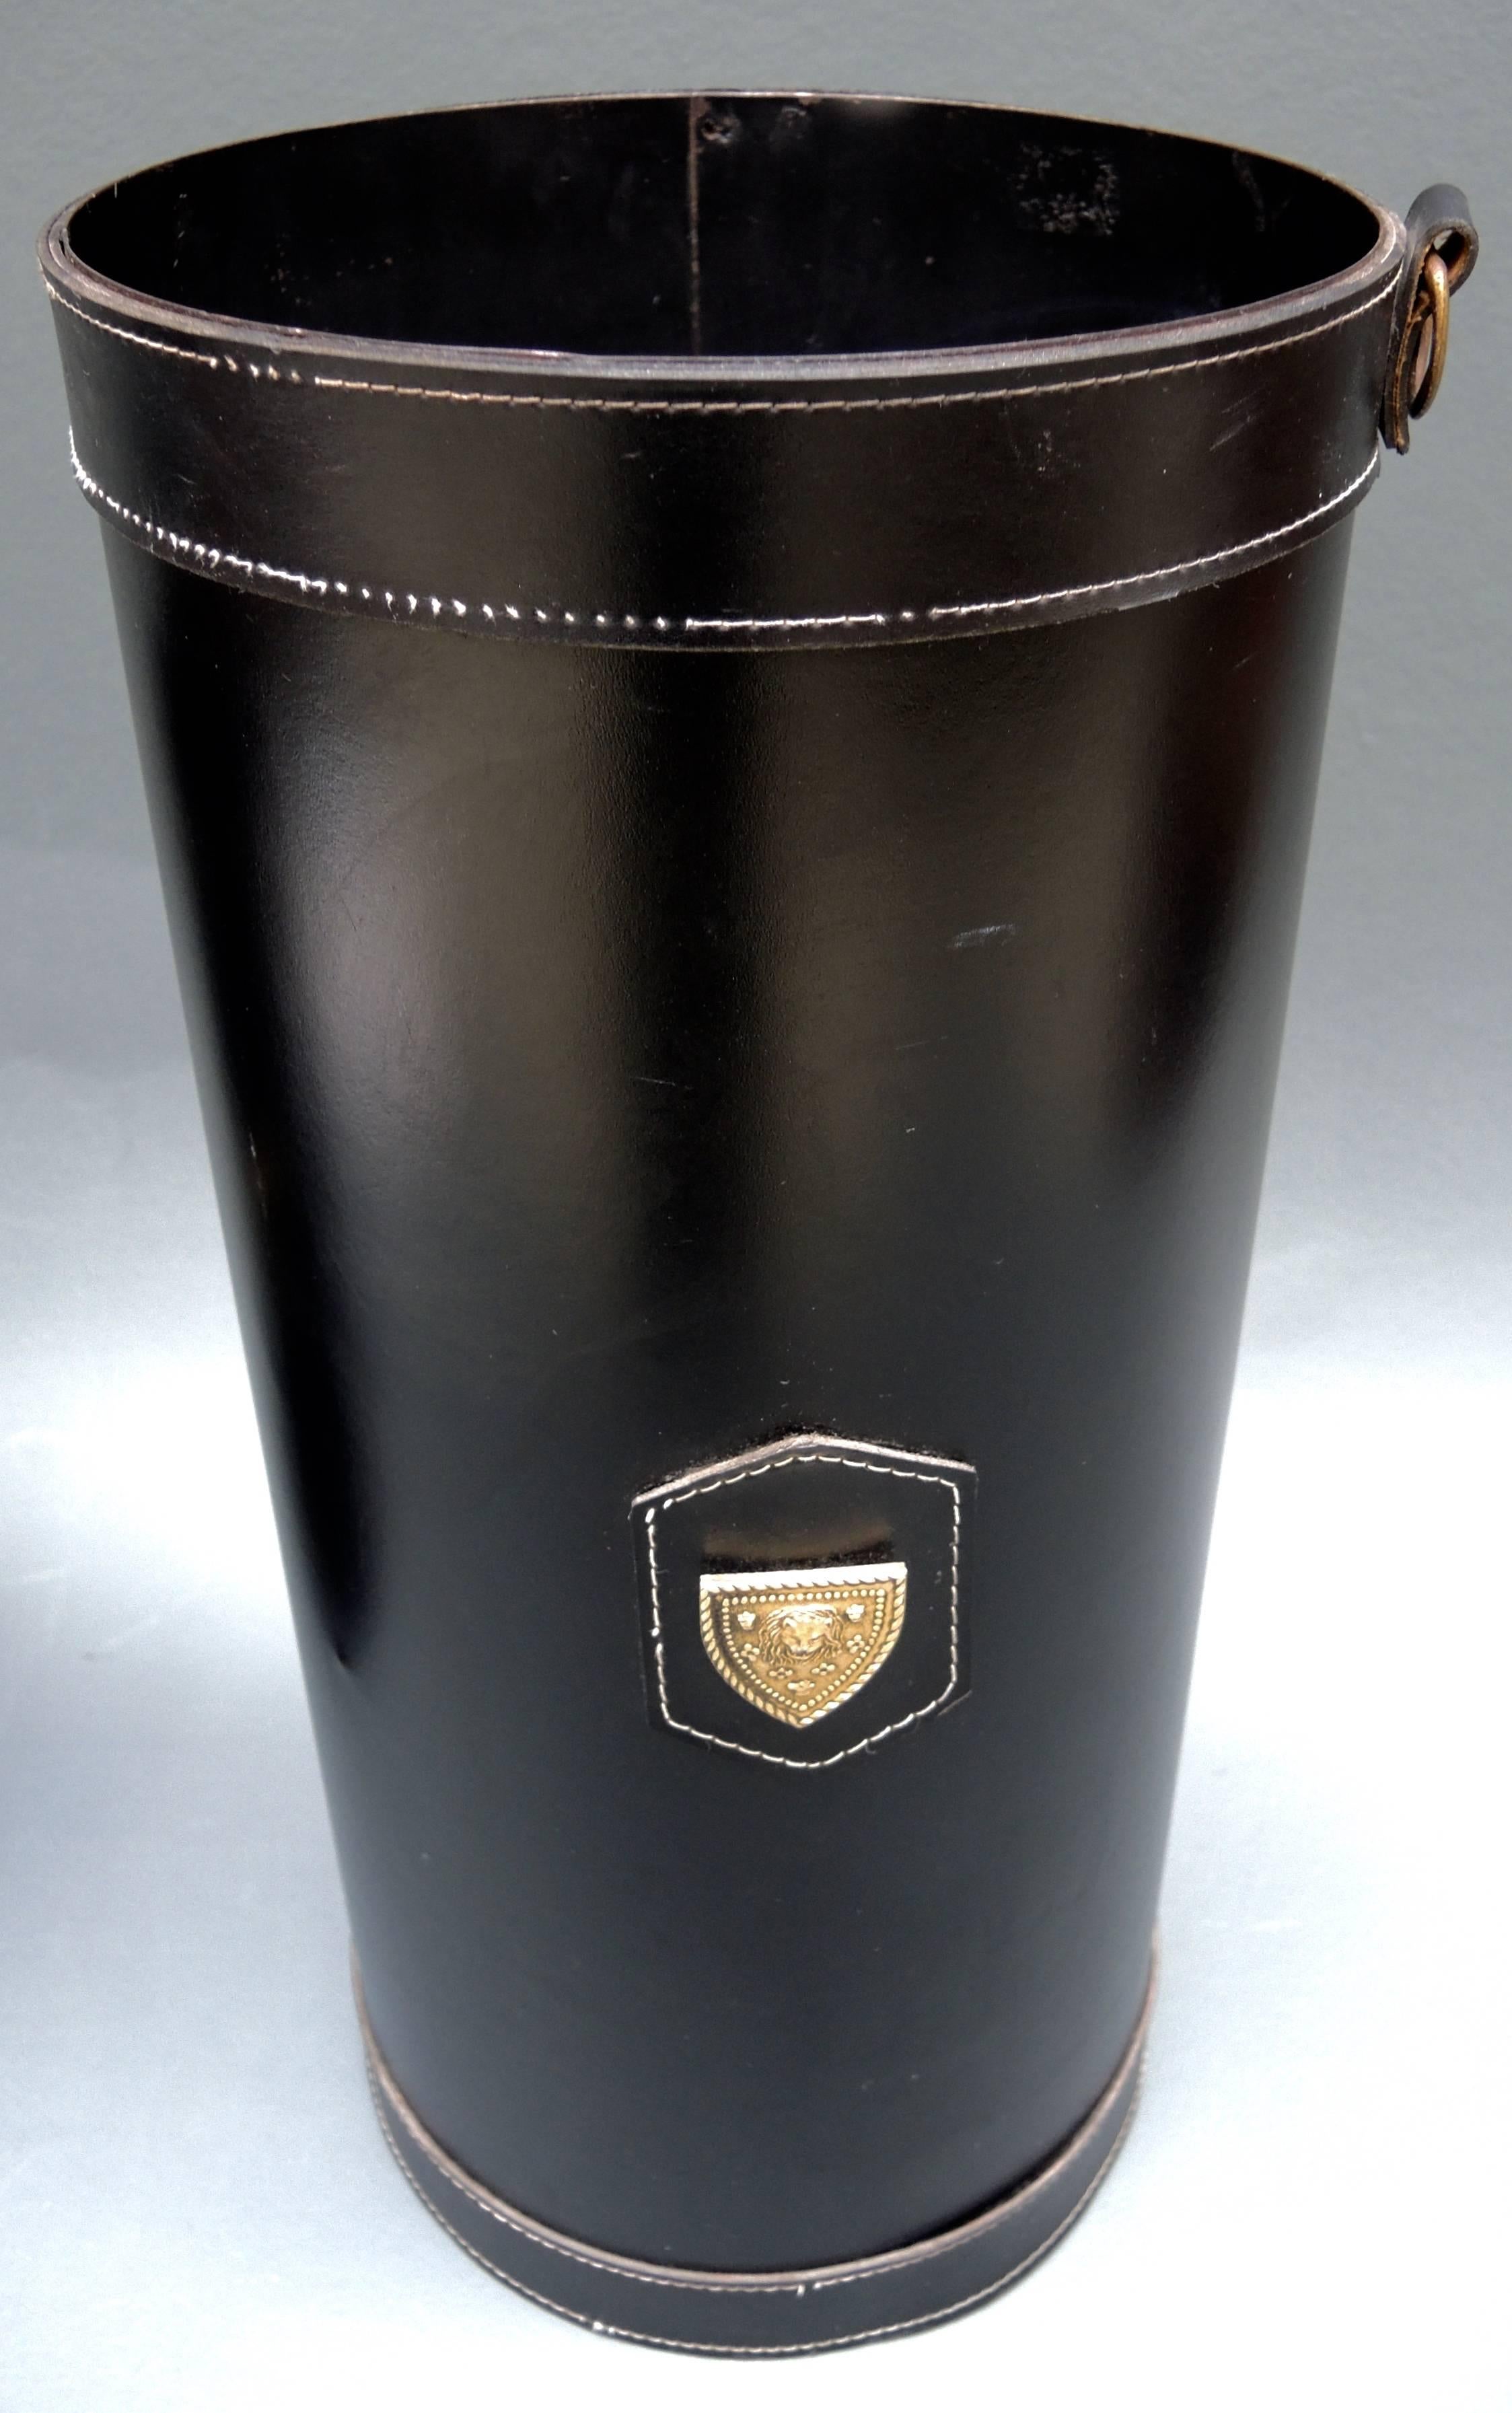 French black leather umbrella stand with saddle stitching and a lion head armorial plaque. Inside there is a removable drip dish.